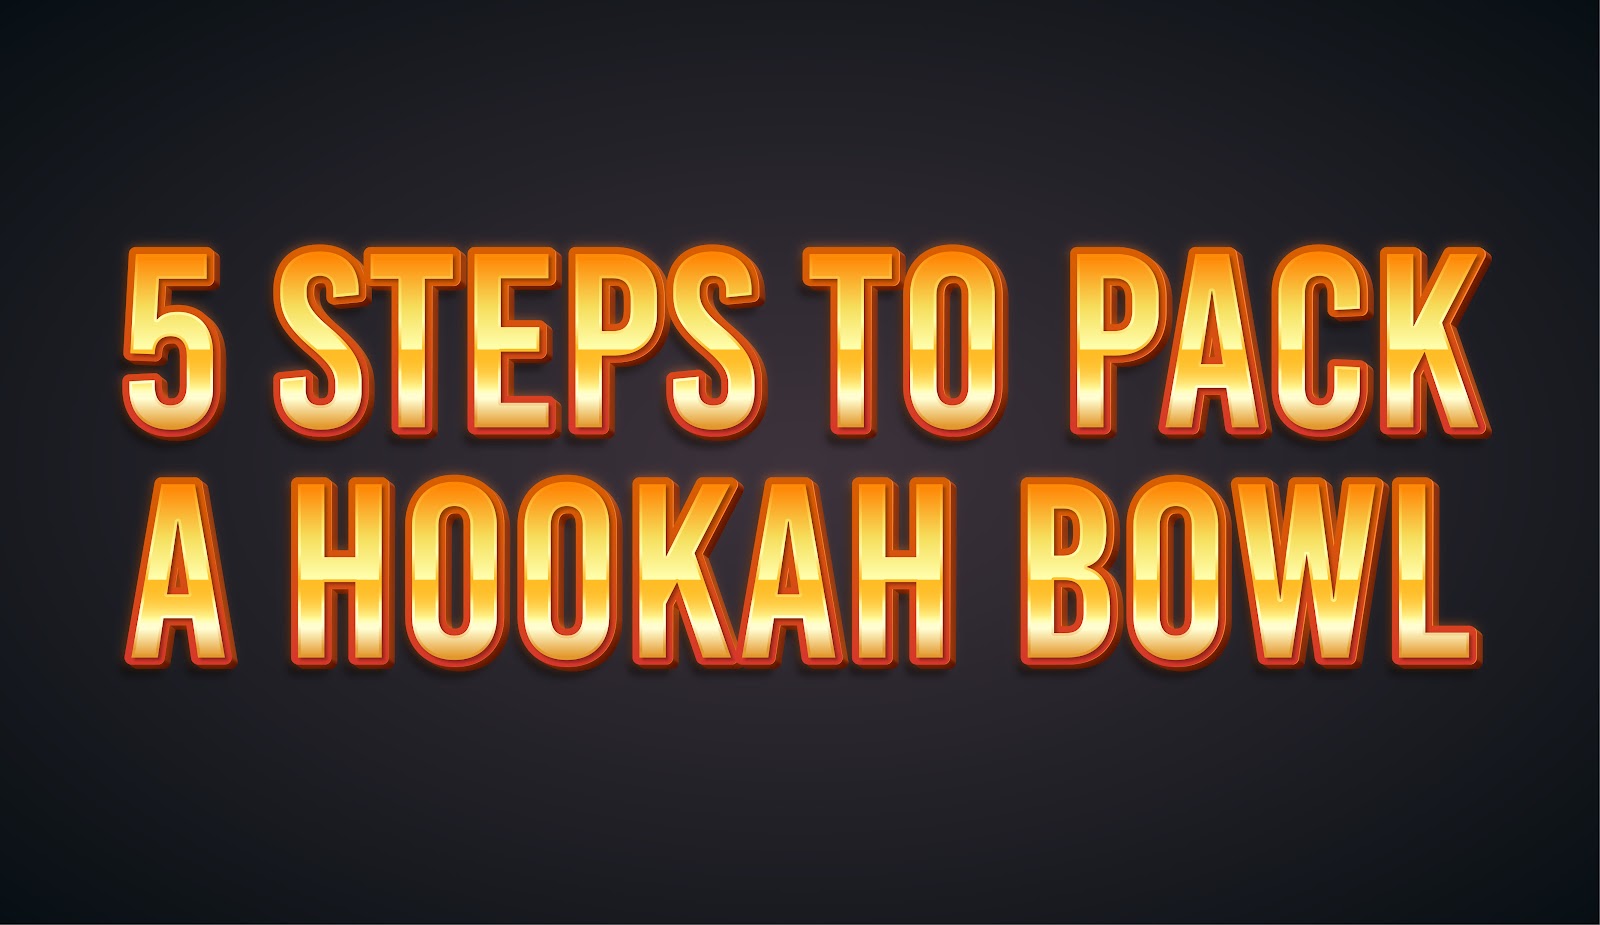 5 Steps To Pack a Hookah Bowl